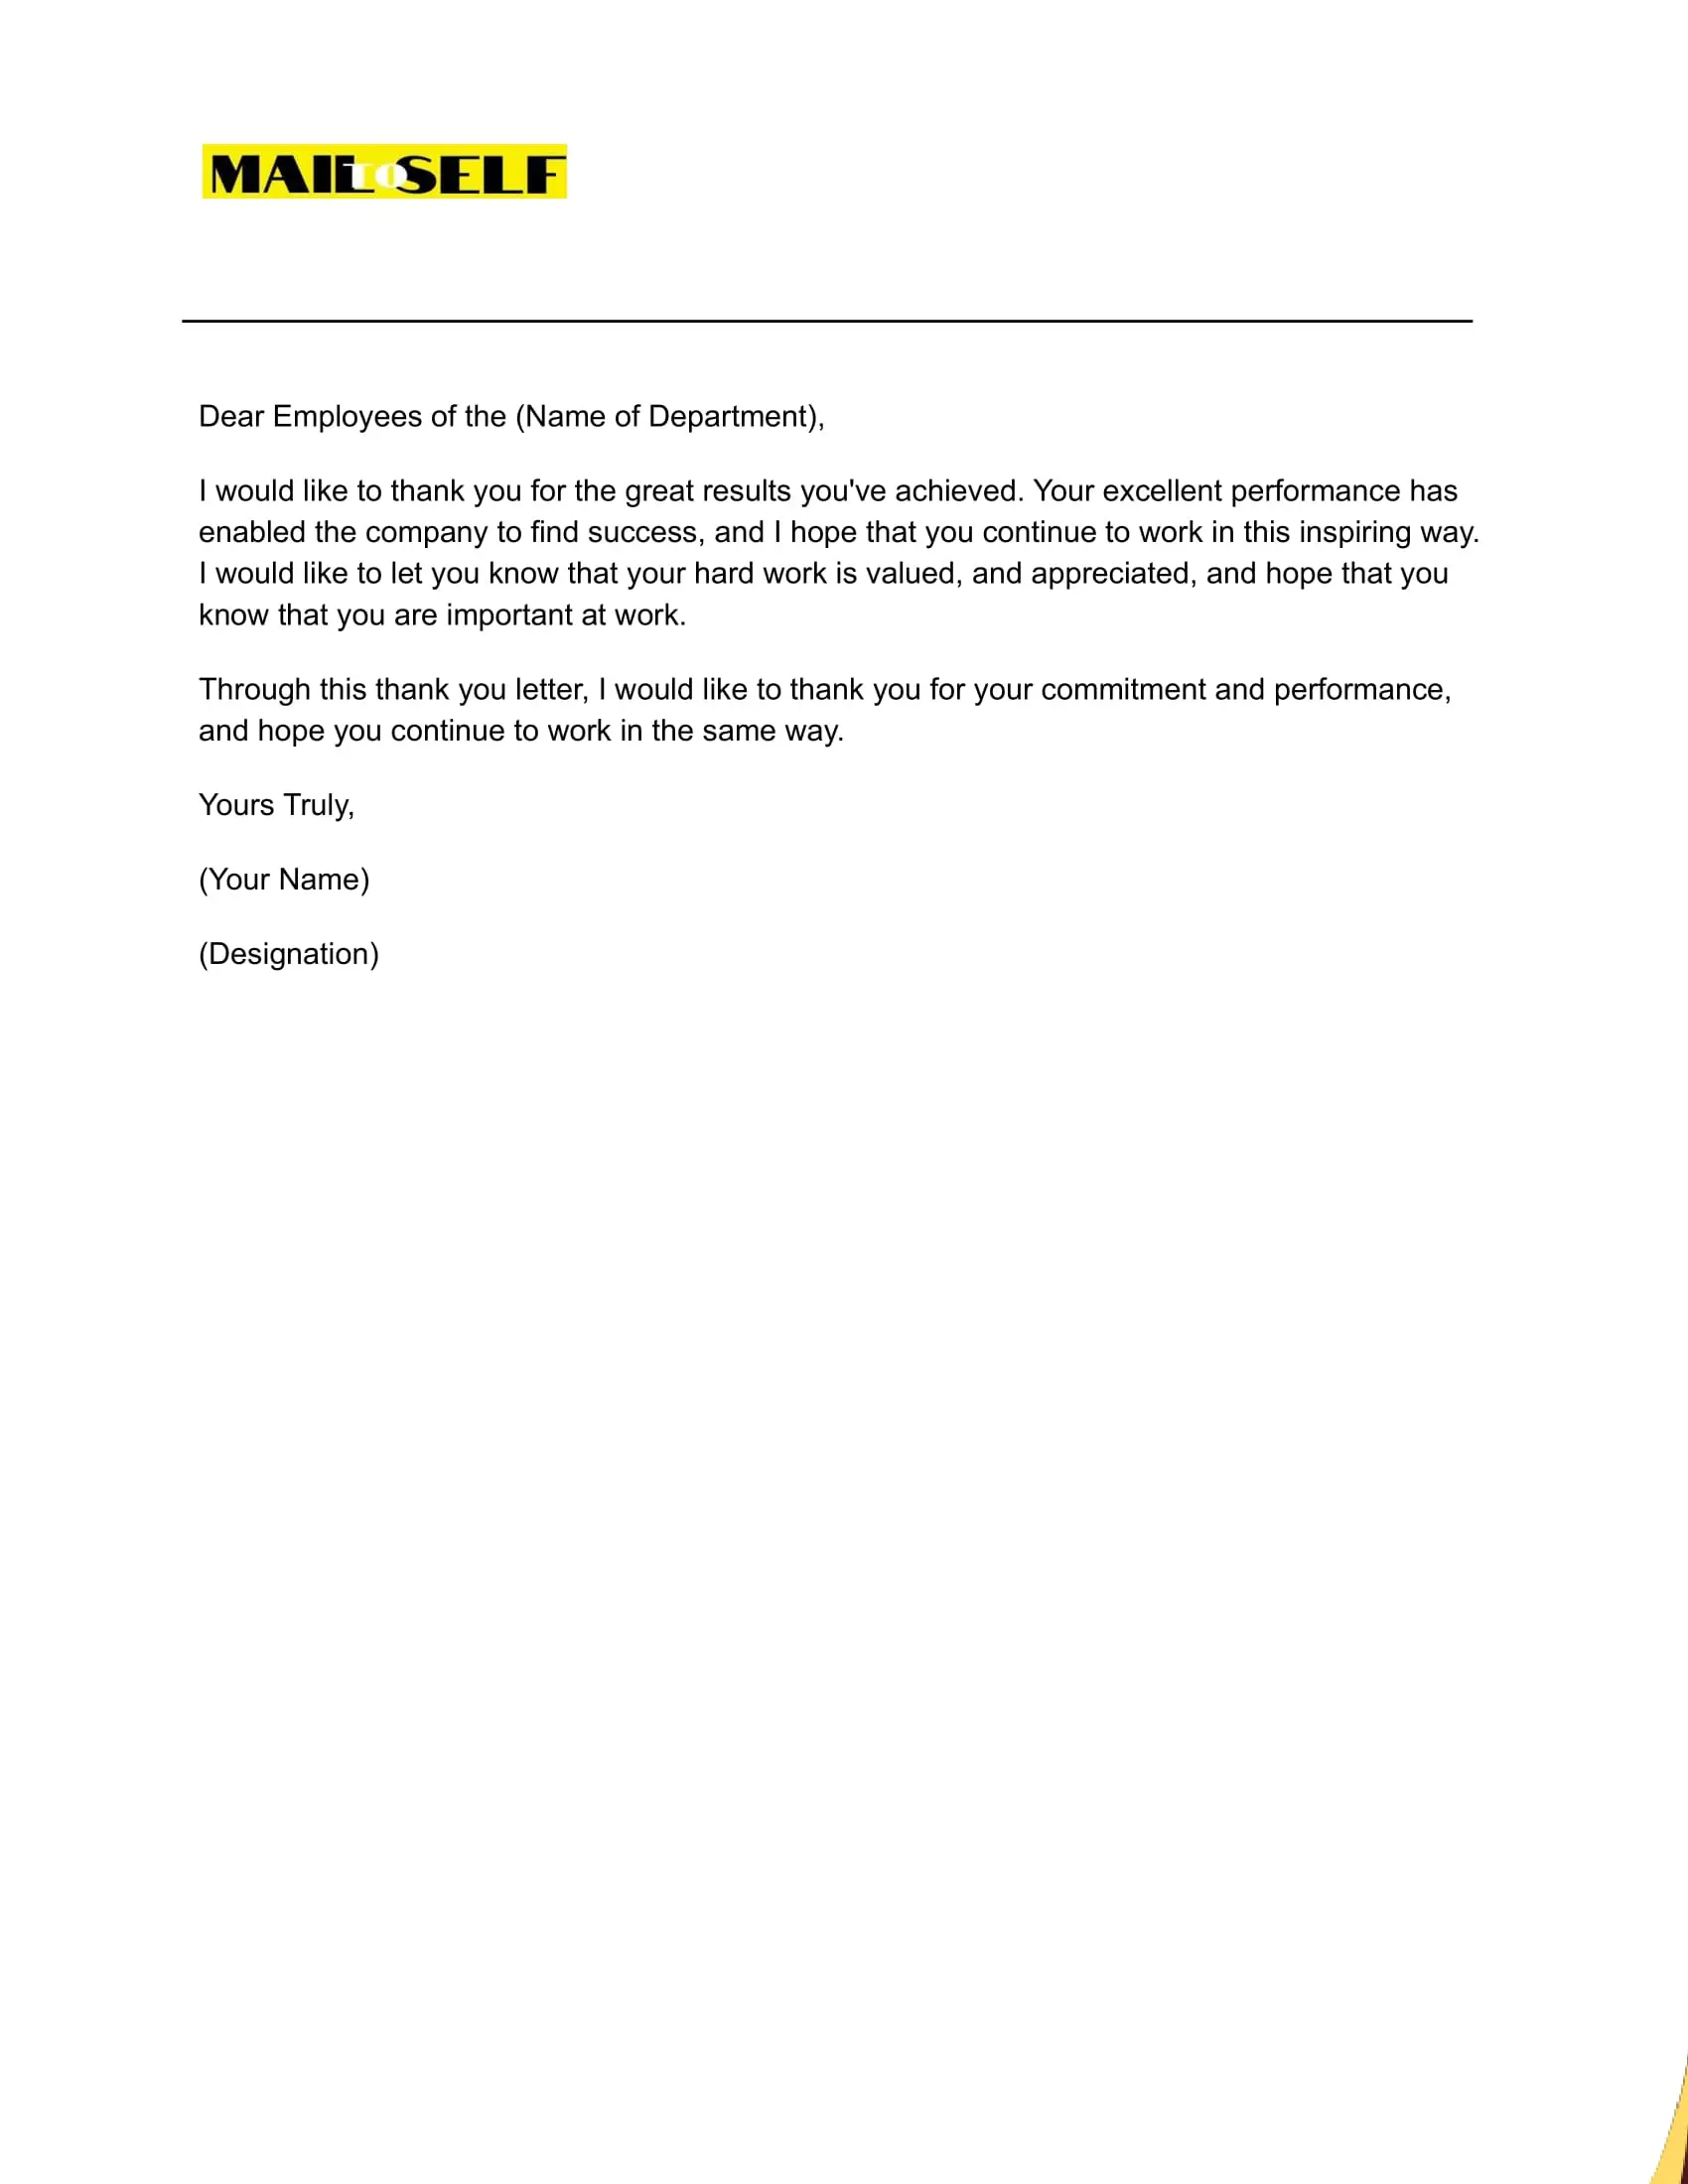 Sample #4 Thank You Letter to Employees for Excellent Performance